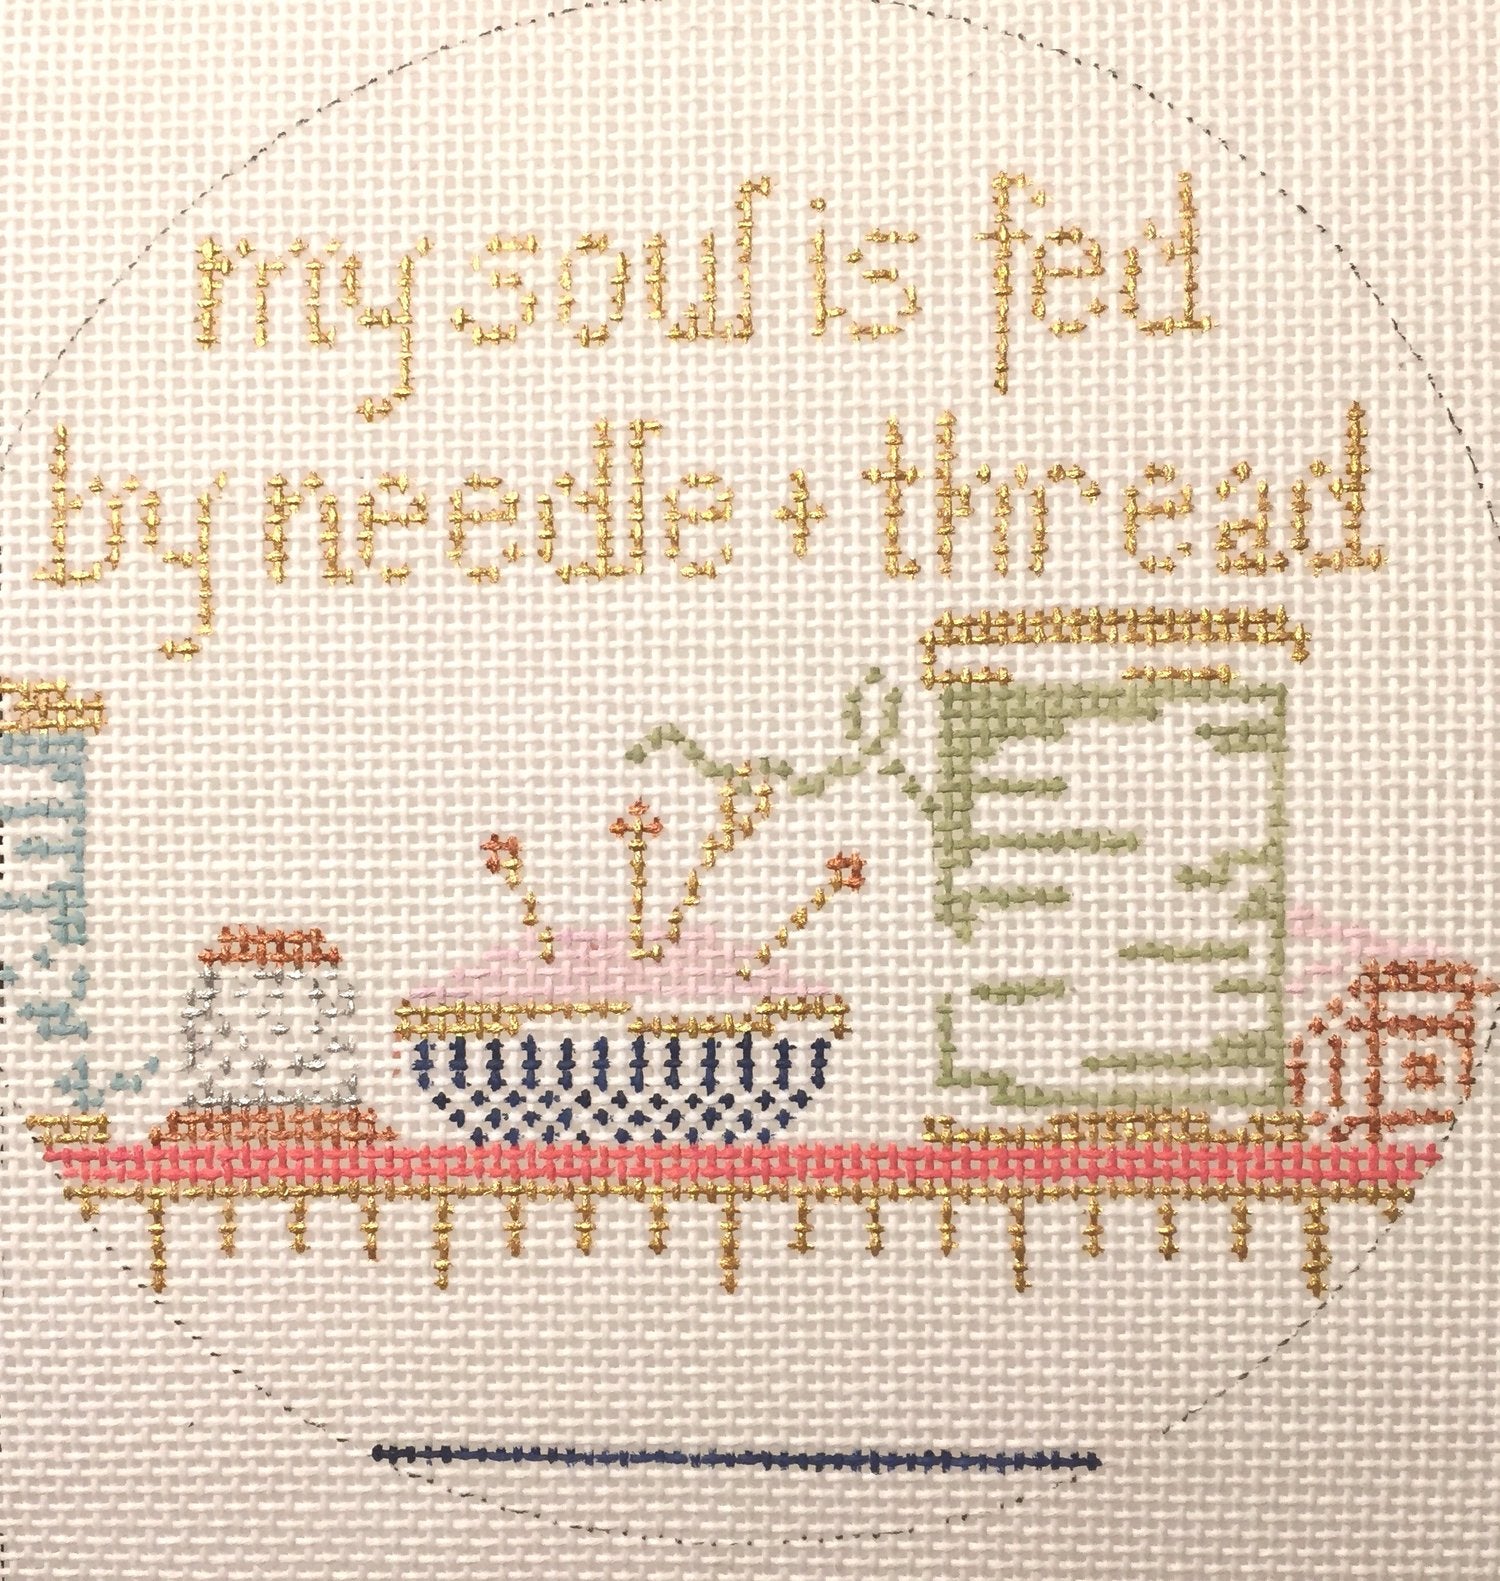 My Soul is fed with Needle and Thread 18 AA